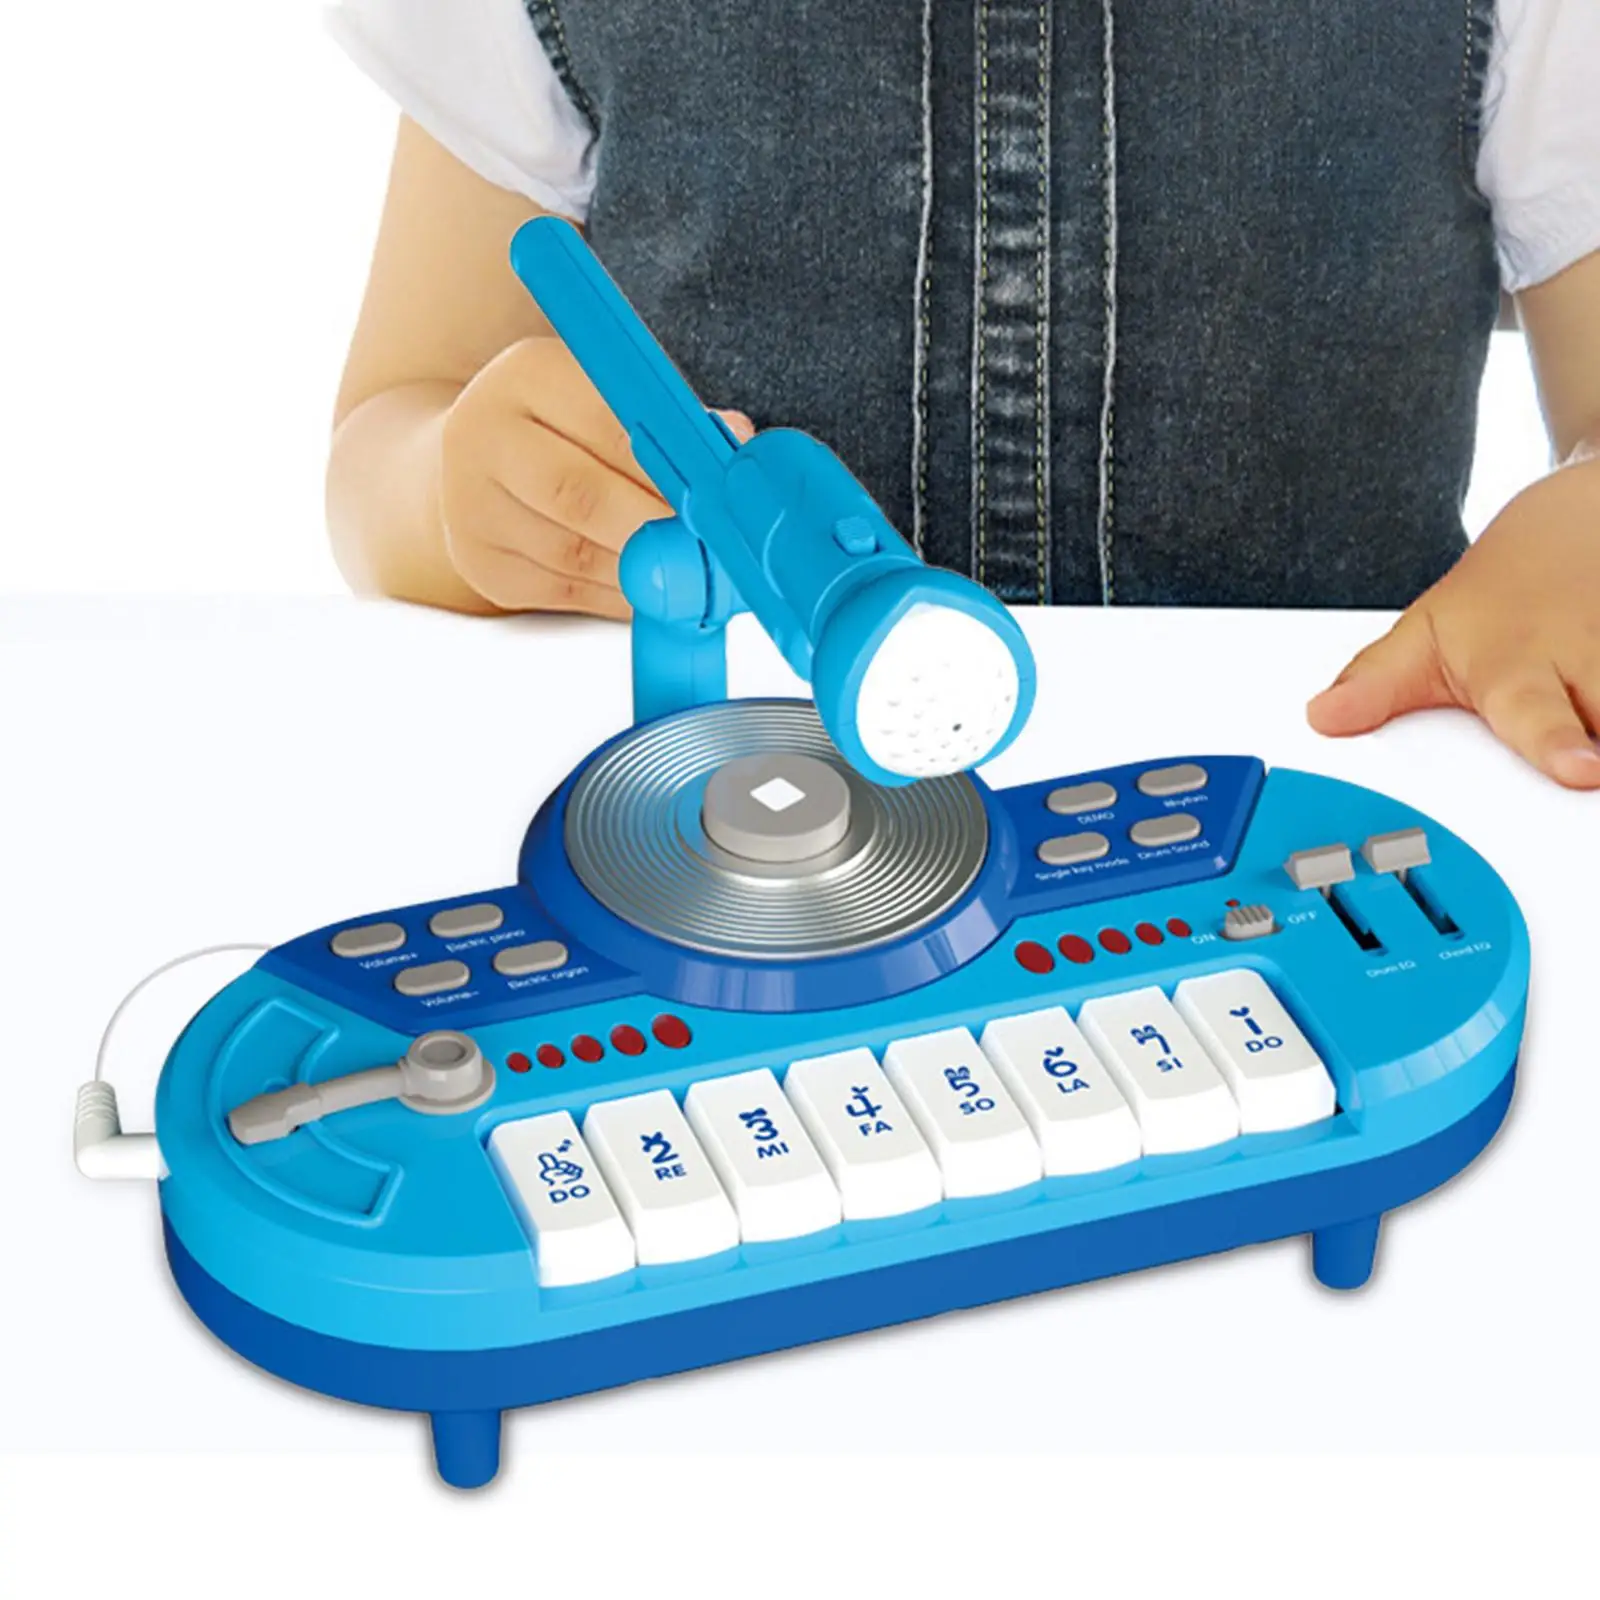 DJ Party Mixer Toy Sound Effects DJ Party Mixer Turntable Toy for 1+ Year Old Gift